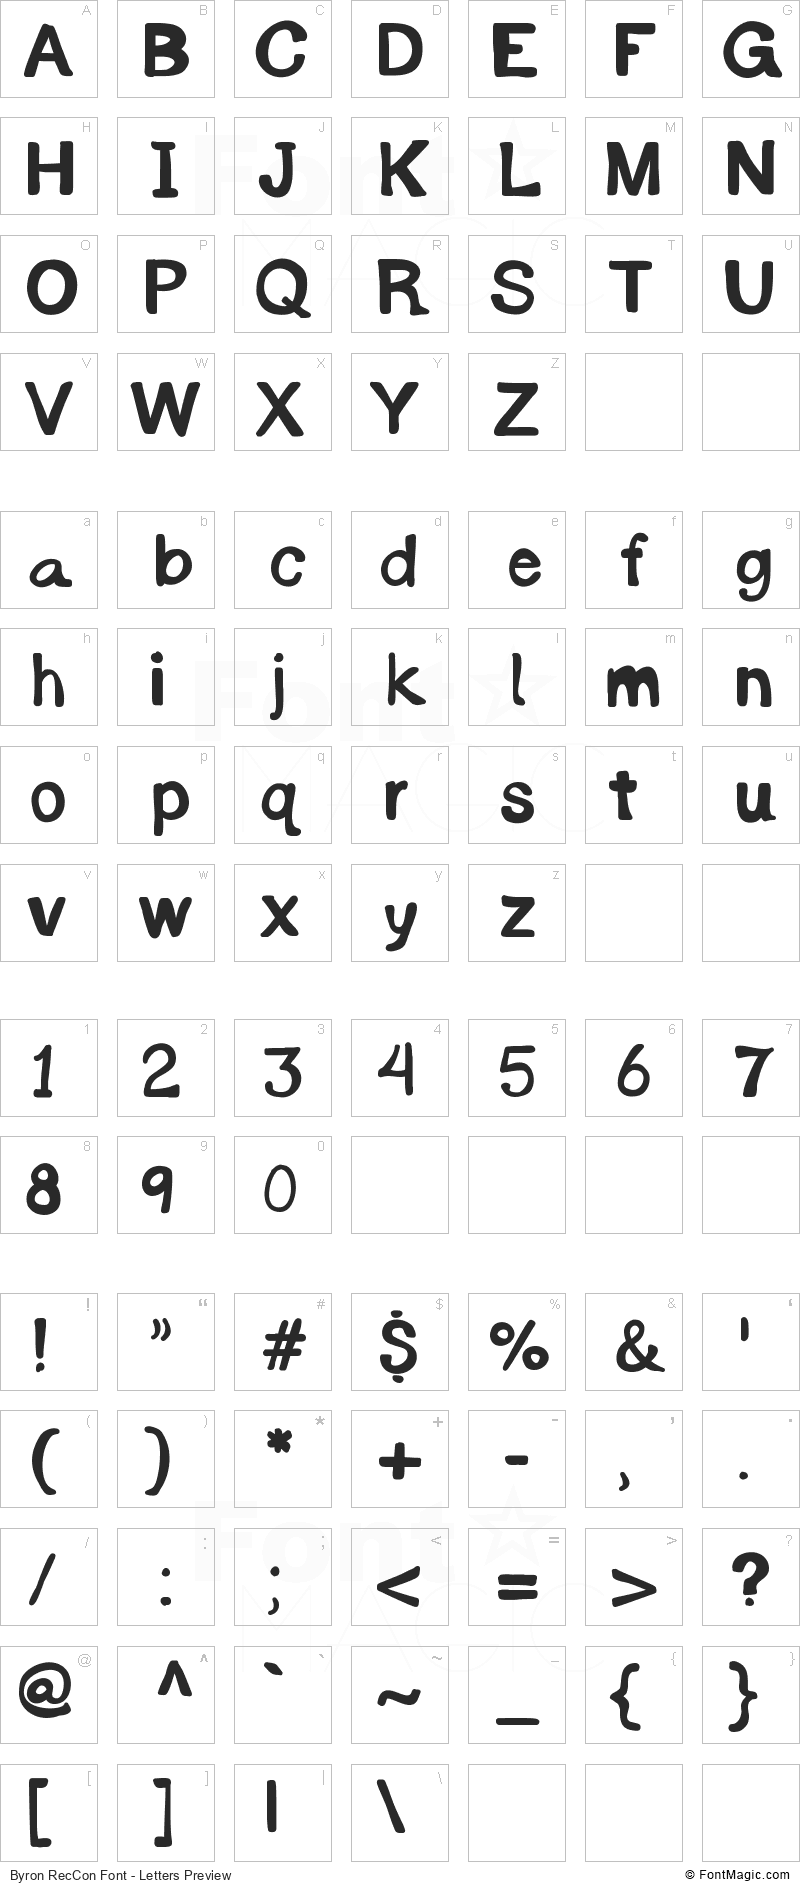 Byron RecCon Font - All Latters Preview Chart